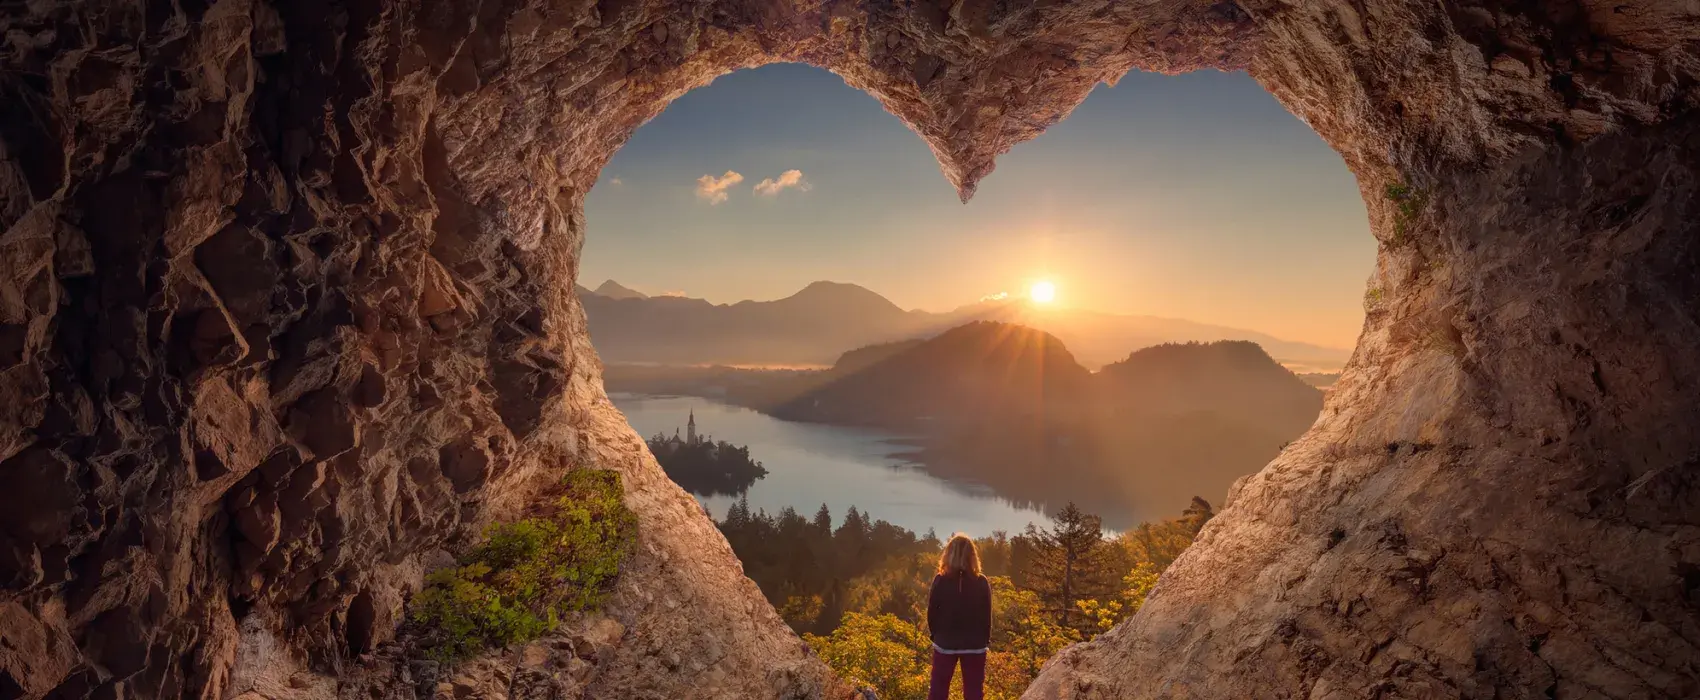 woman standing in a heart shaped cave looking out at a sunset